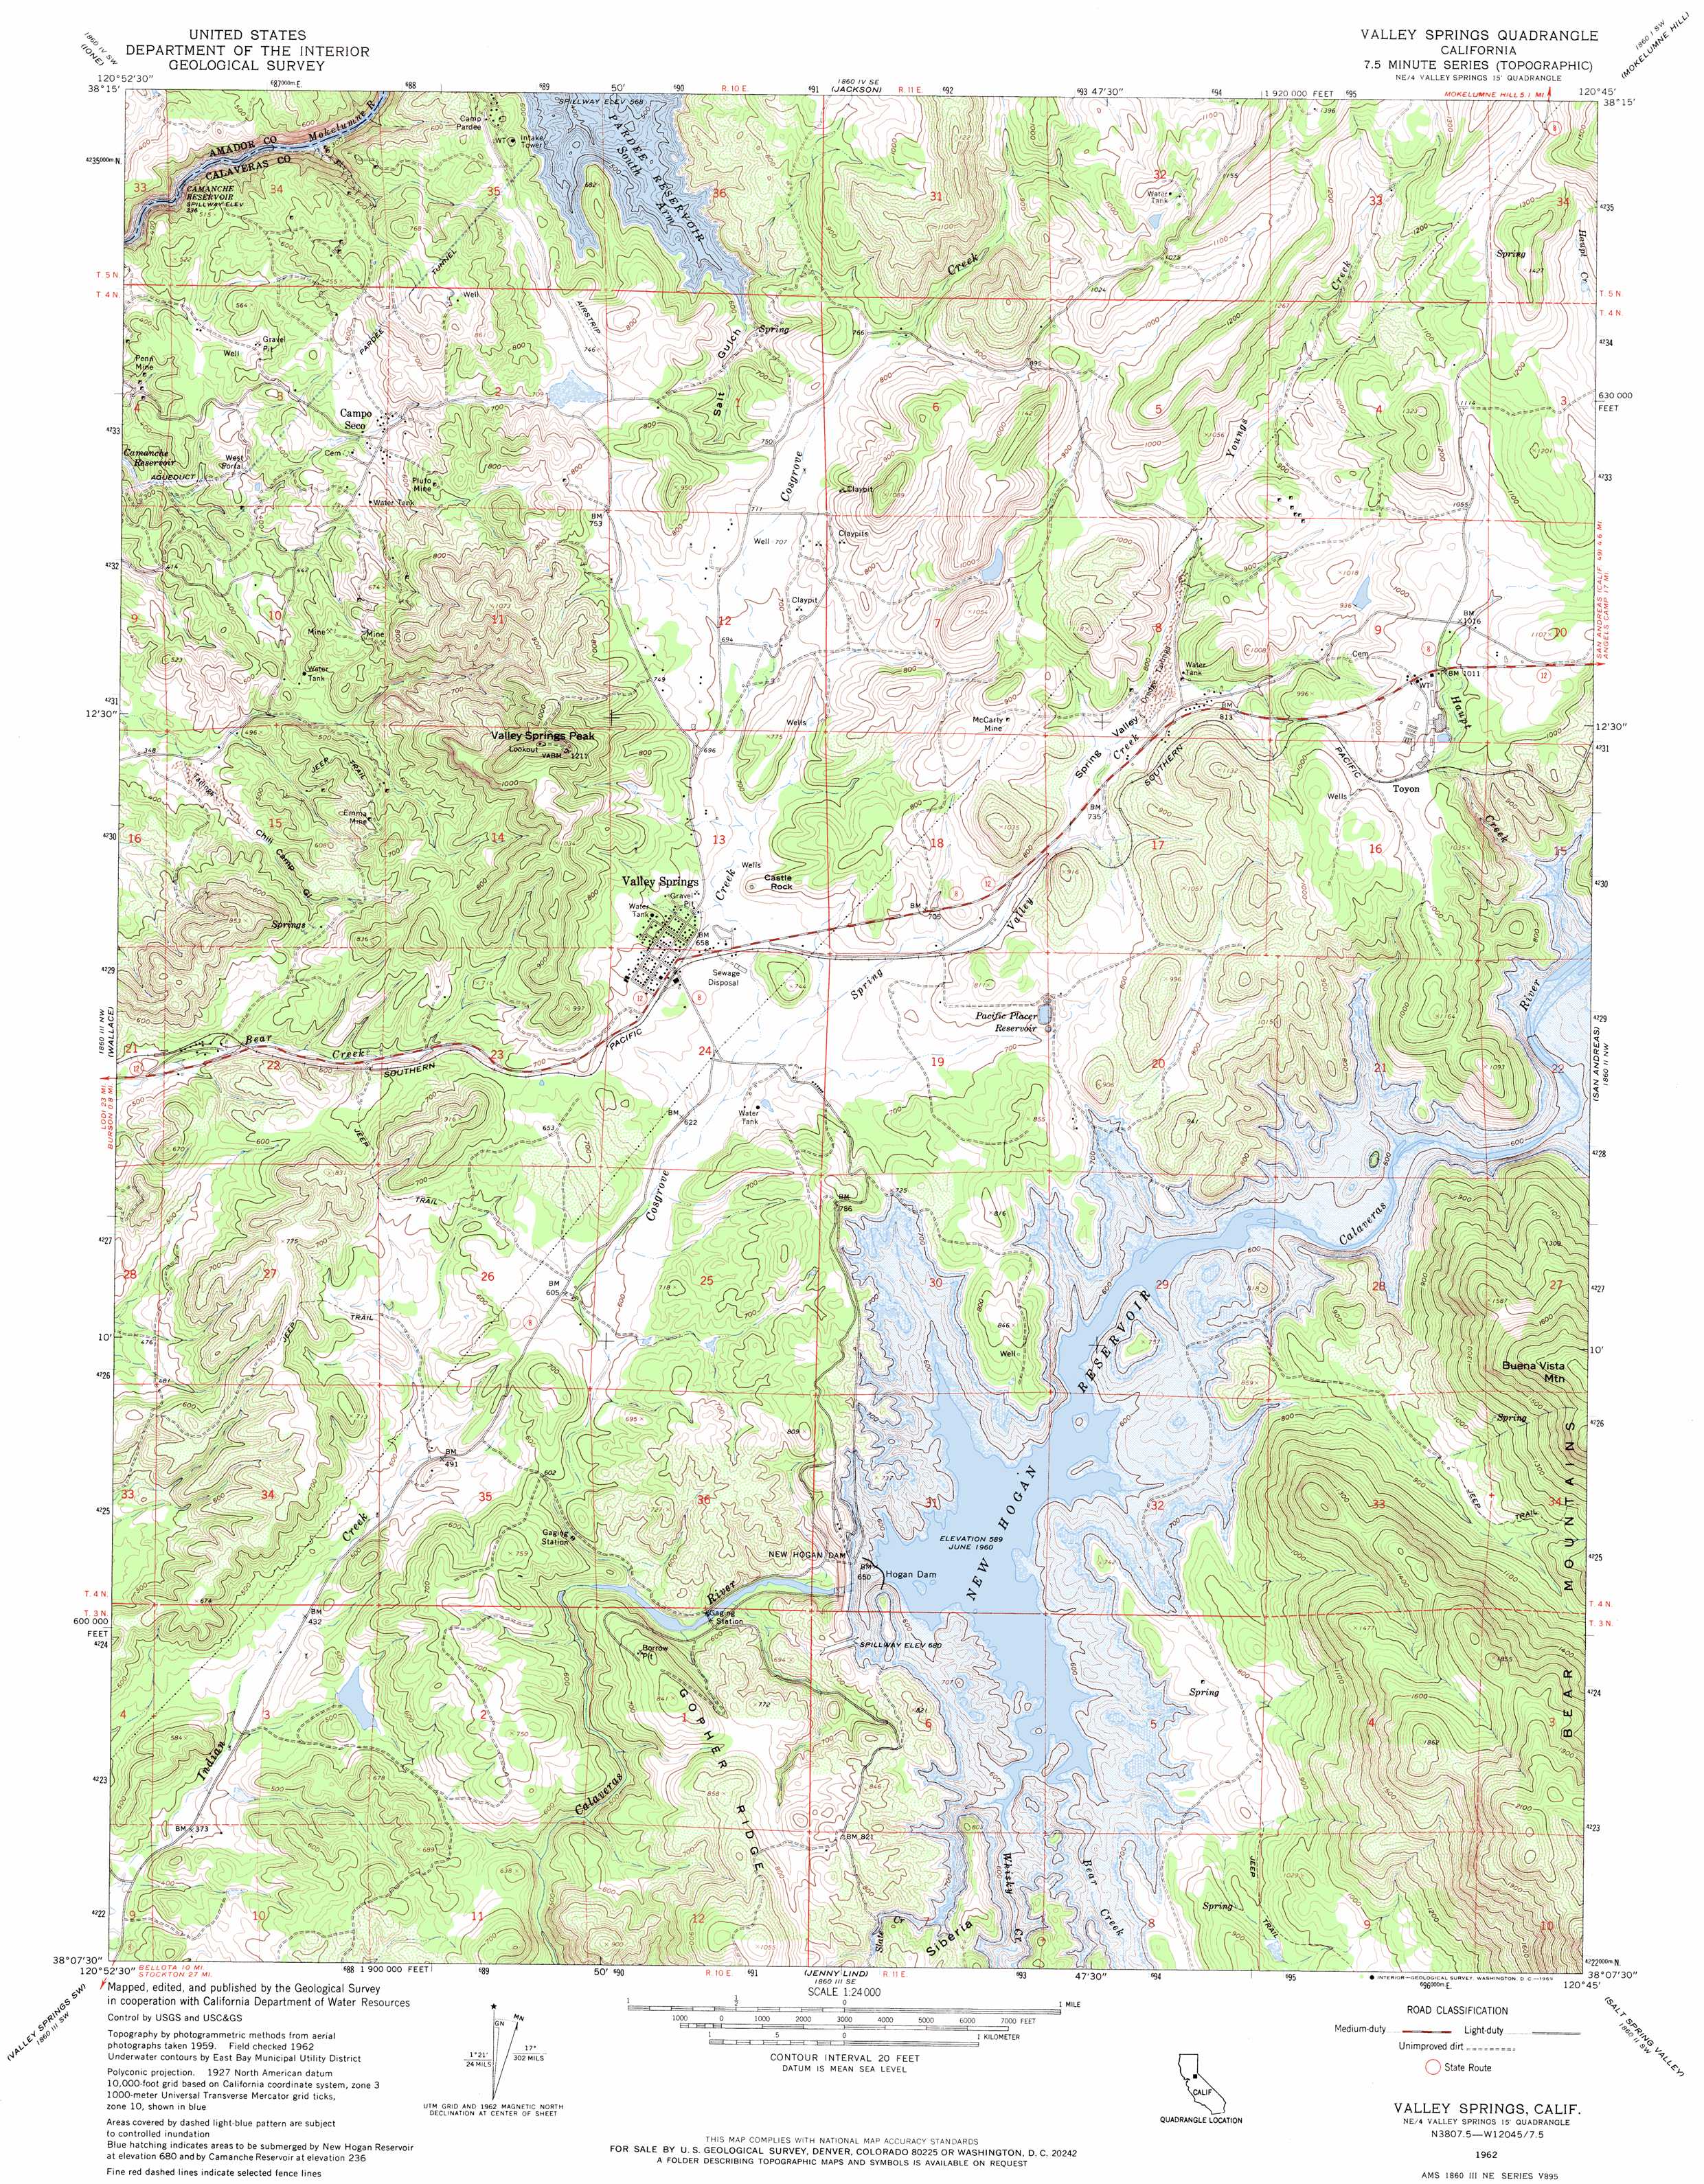 Valley Springs topographic map 1:24,000 scale, California